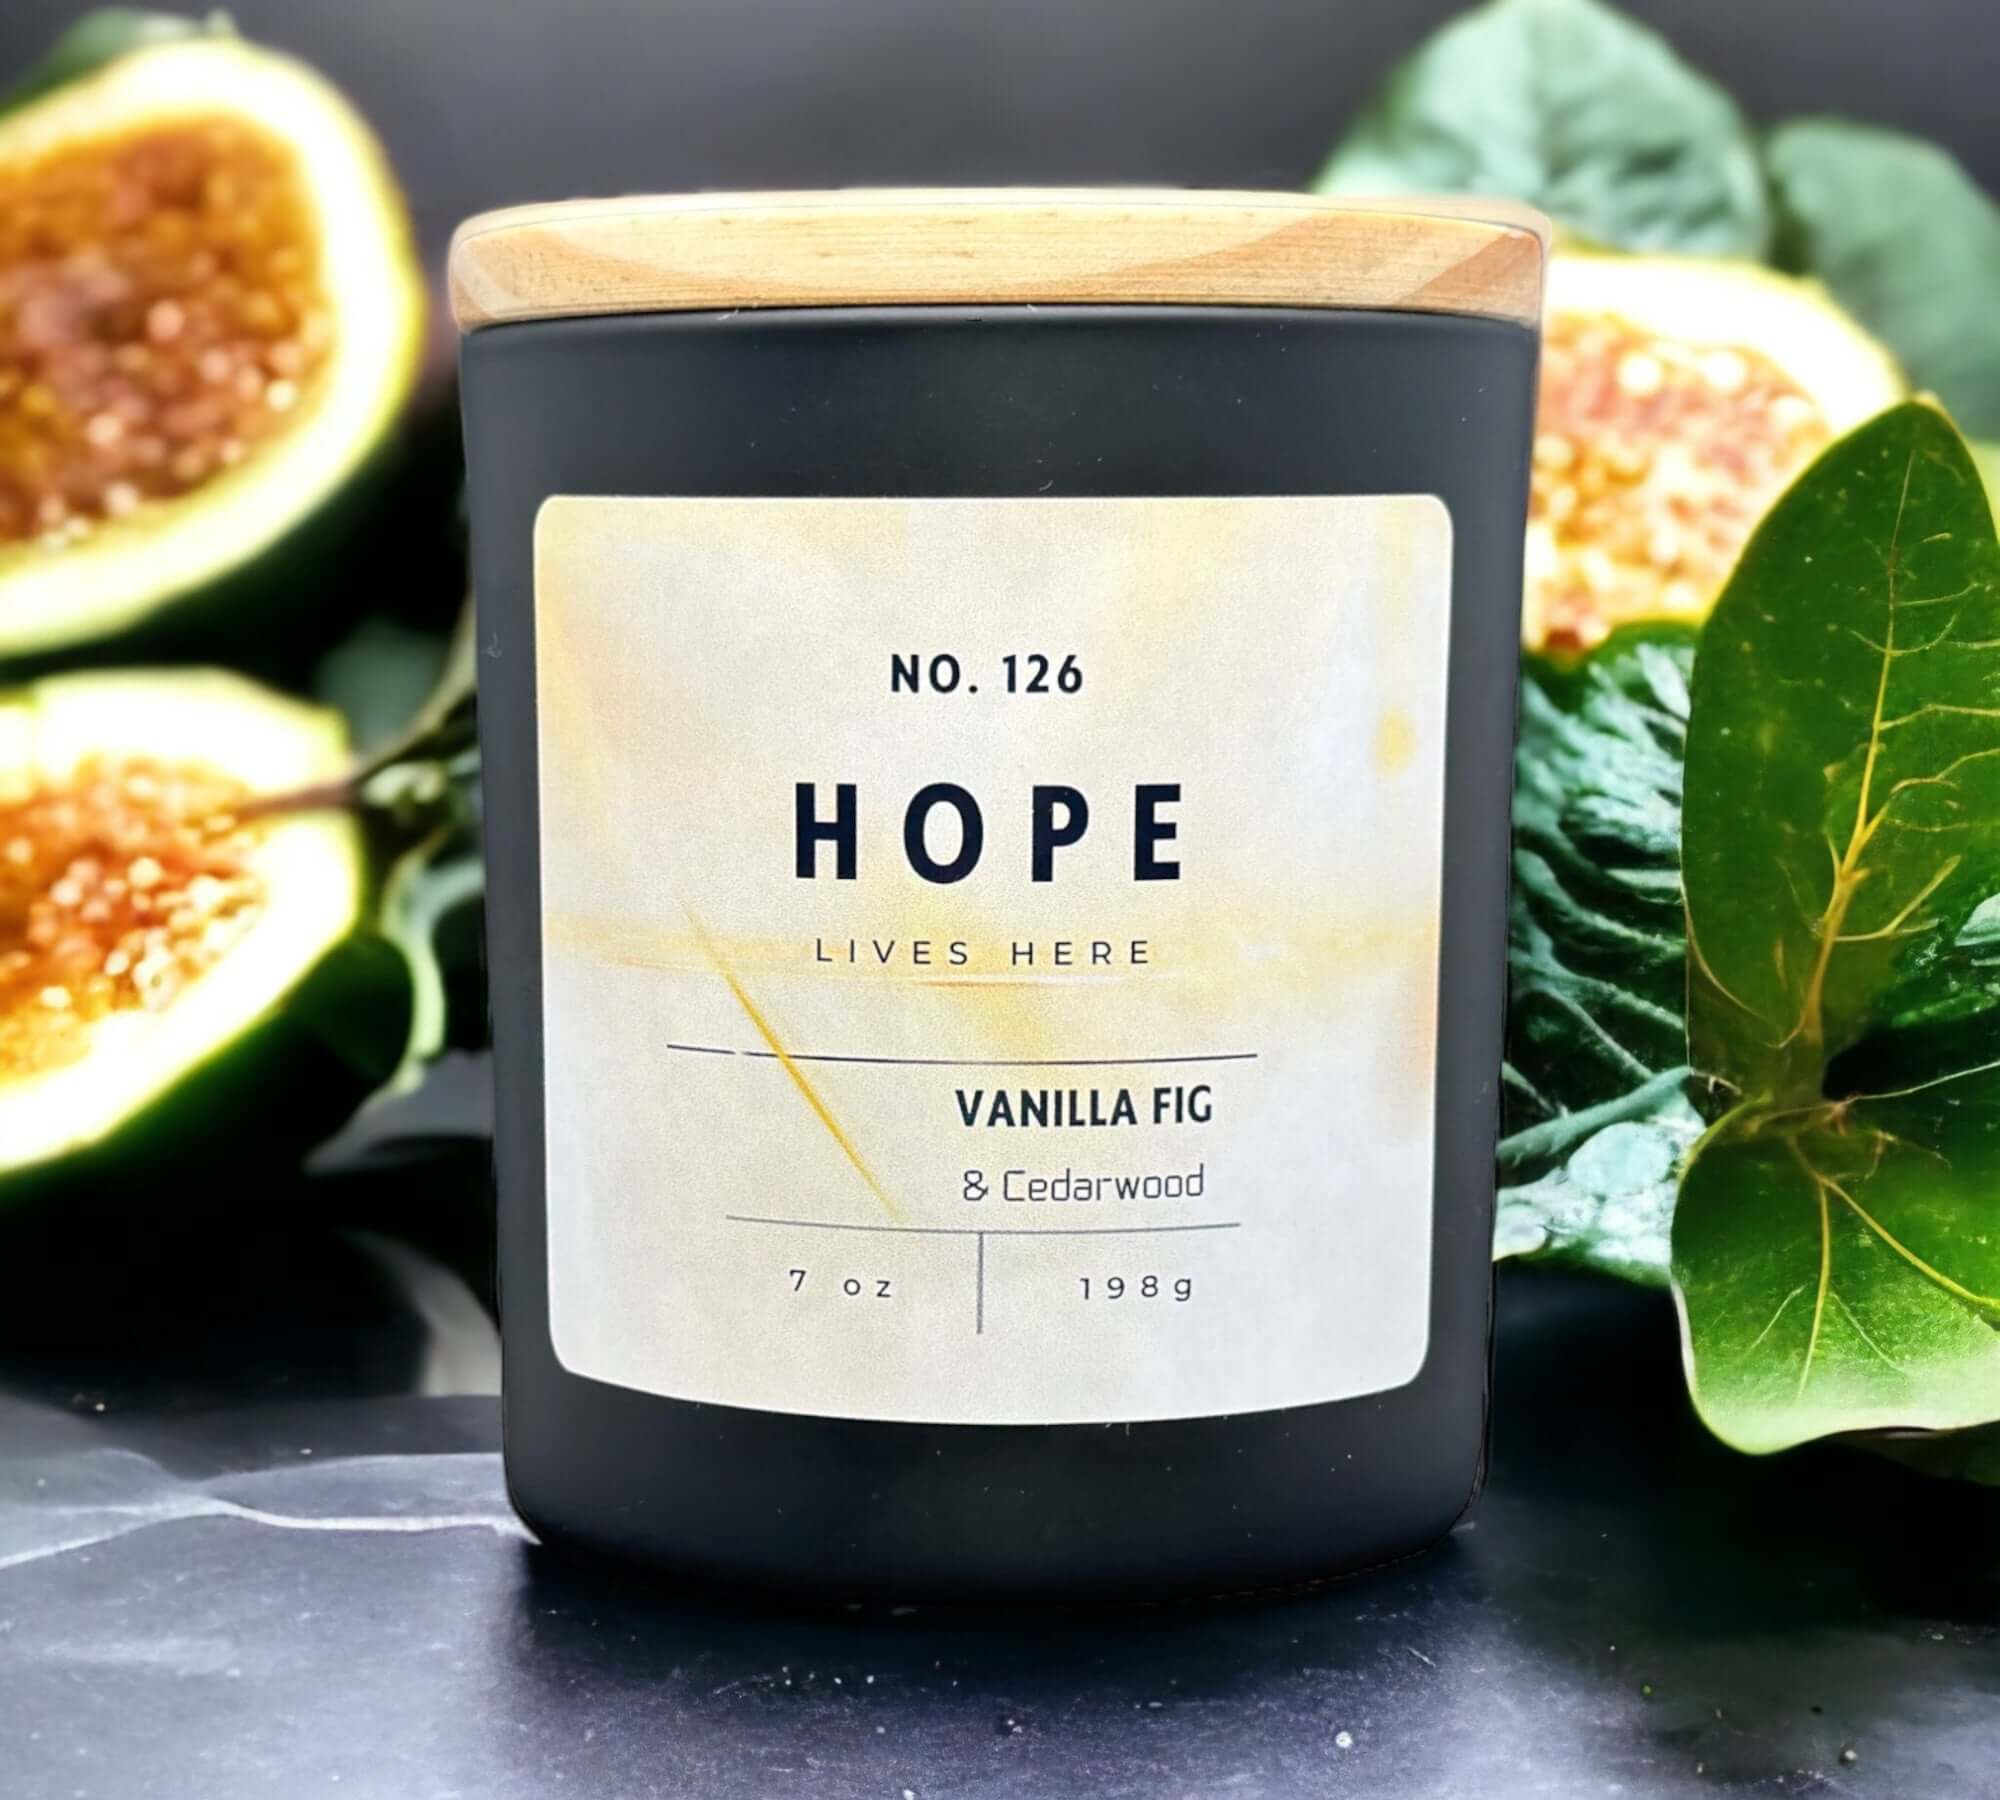 Hope lives here candle. Vanilla, fig and cedarwood candle